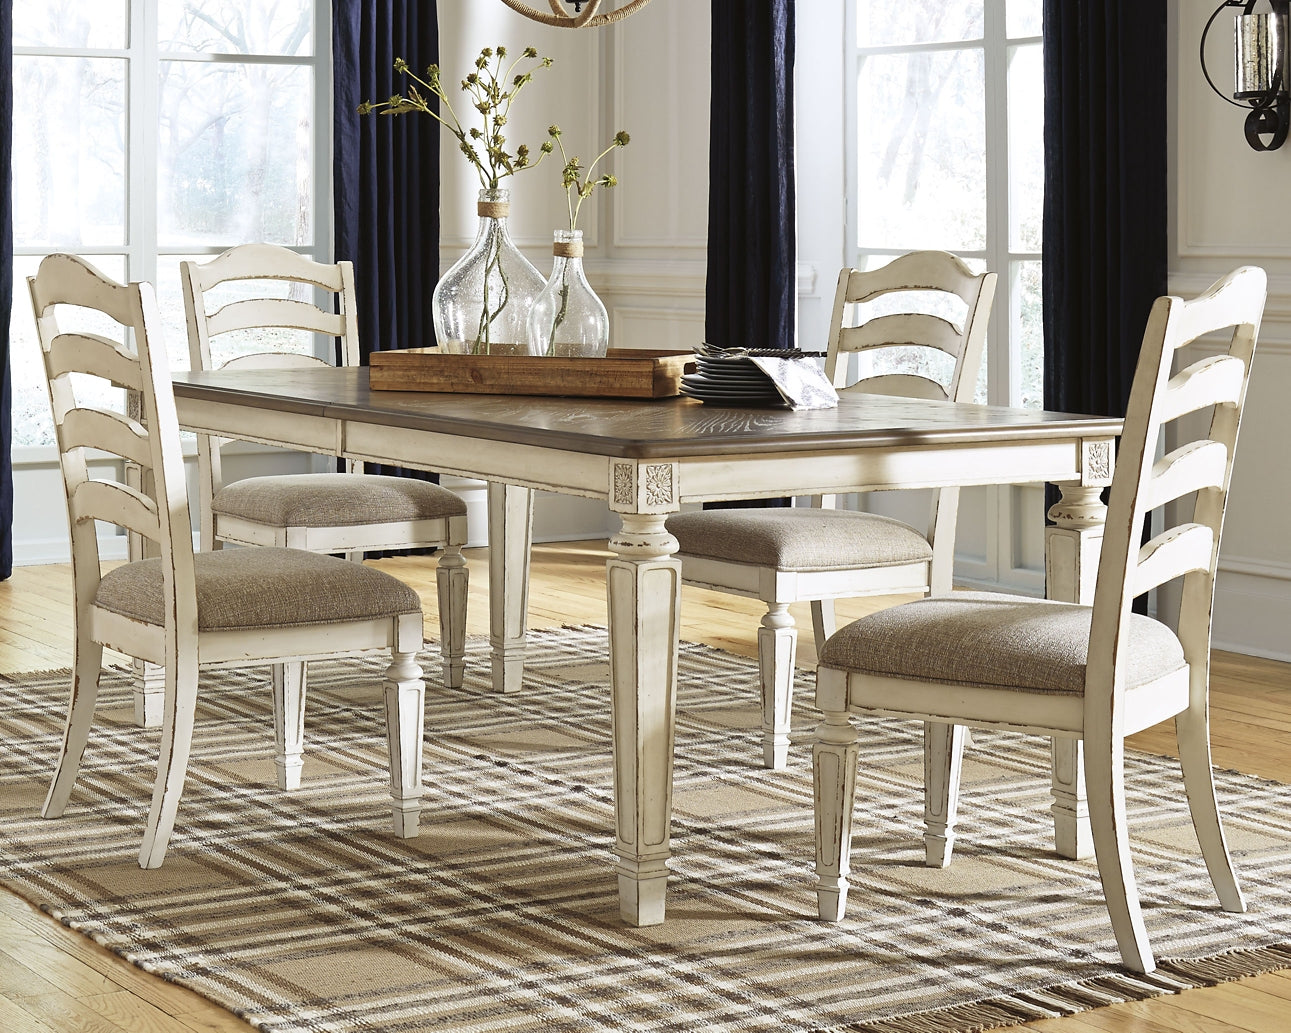 Realyn Dining Table and 8 Chairs Wilson Furniture (OH)  in Bridgeport, Ohio. Serving Bridgeport, Yorkville, Bellaire, & Avondale